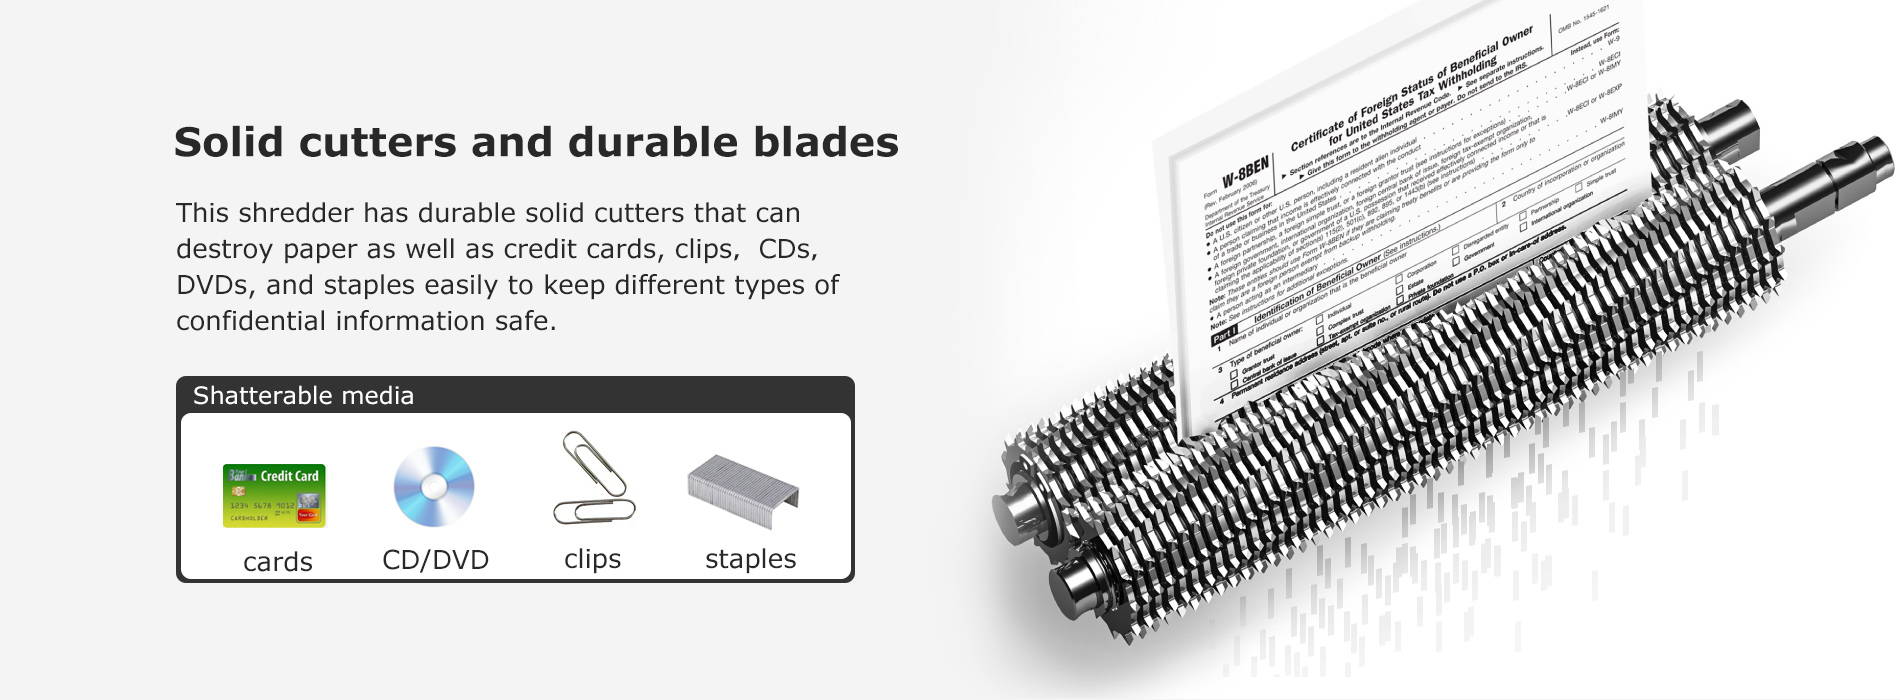 Solid cutters and durable blades  This shredder has durable solid cutters that can destroy paper as well as credit cards, clips. CDs, DVDs, and staples easily to keep different types of confidential information safe.